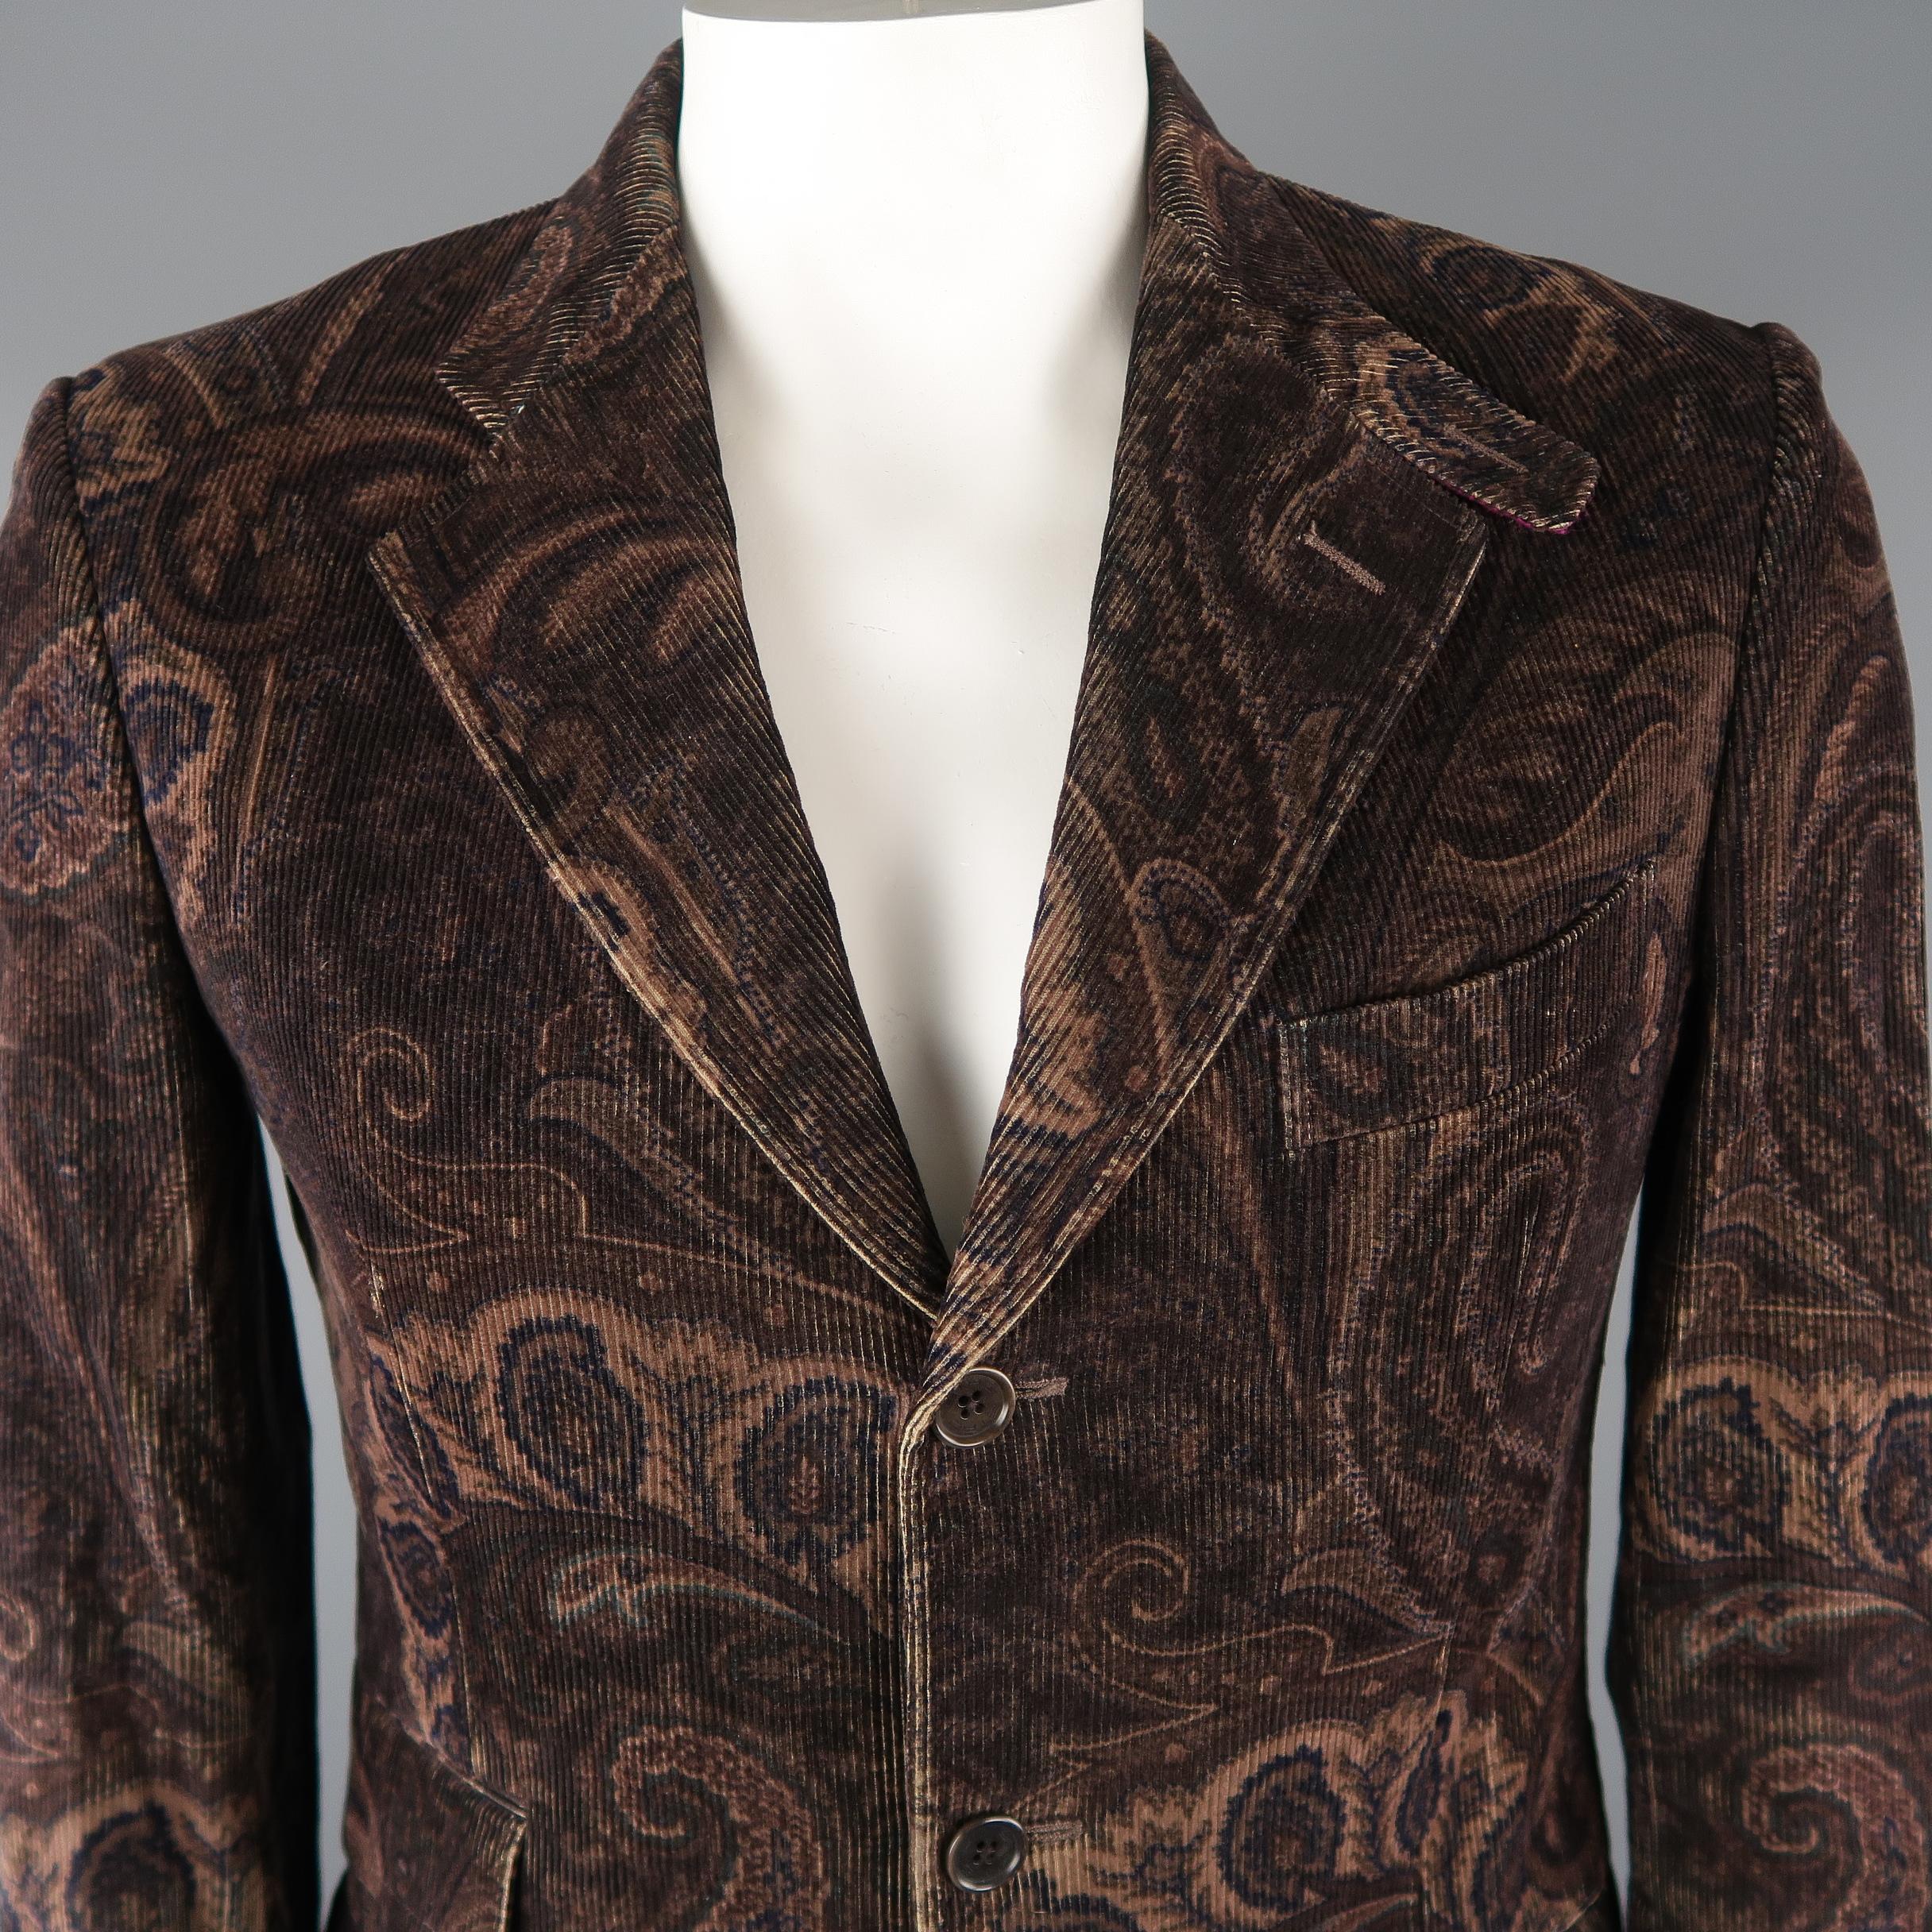 ETRO sport coat come in brown tones in paisley corduroy, with notch lapel, slit pockets, single breasted and three button closure. Presenting a light white mark on the back left side. Made in Italy.
 
Excellent Pre-Owned Condition.
Marked: 50 IT
